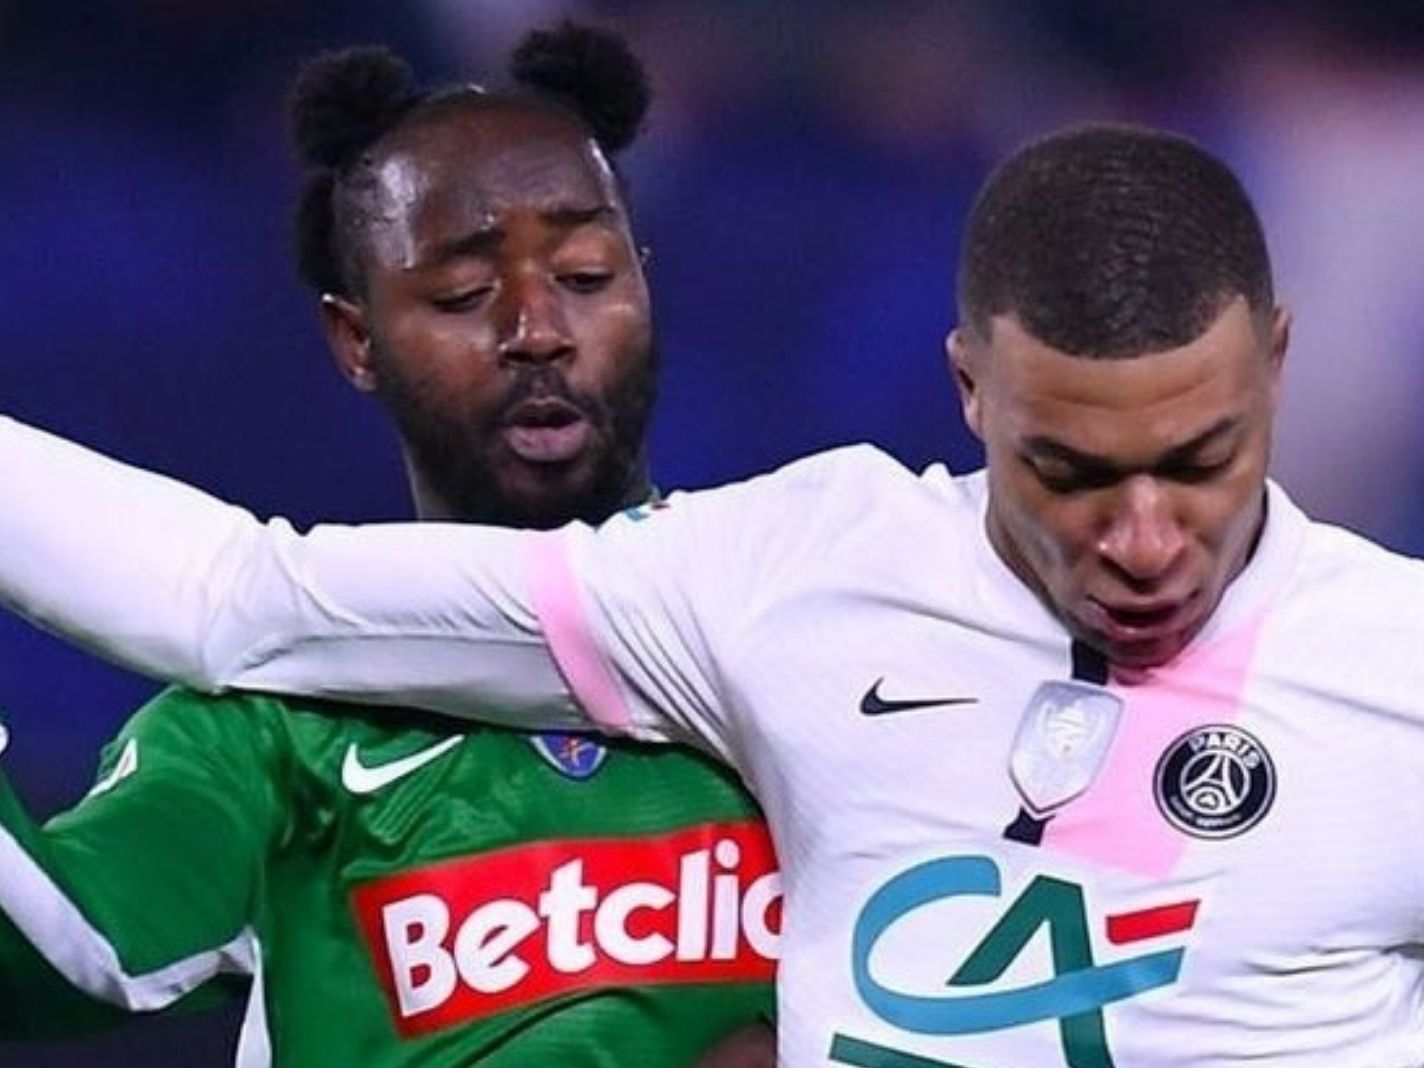 What is a Mickey Mouse league as photo of Kylian Mbappe goes viral?